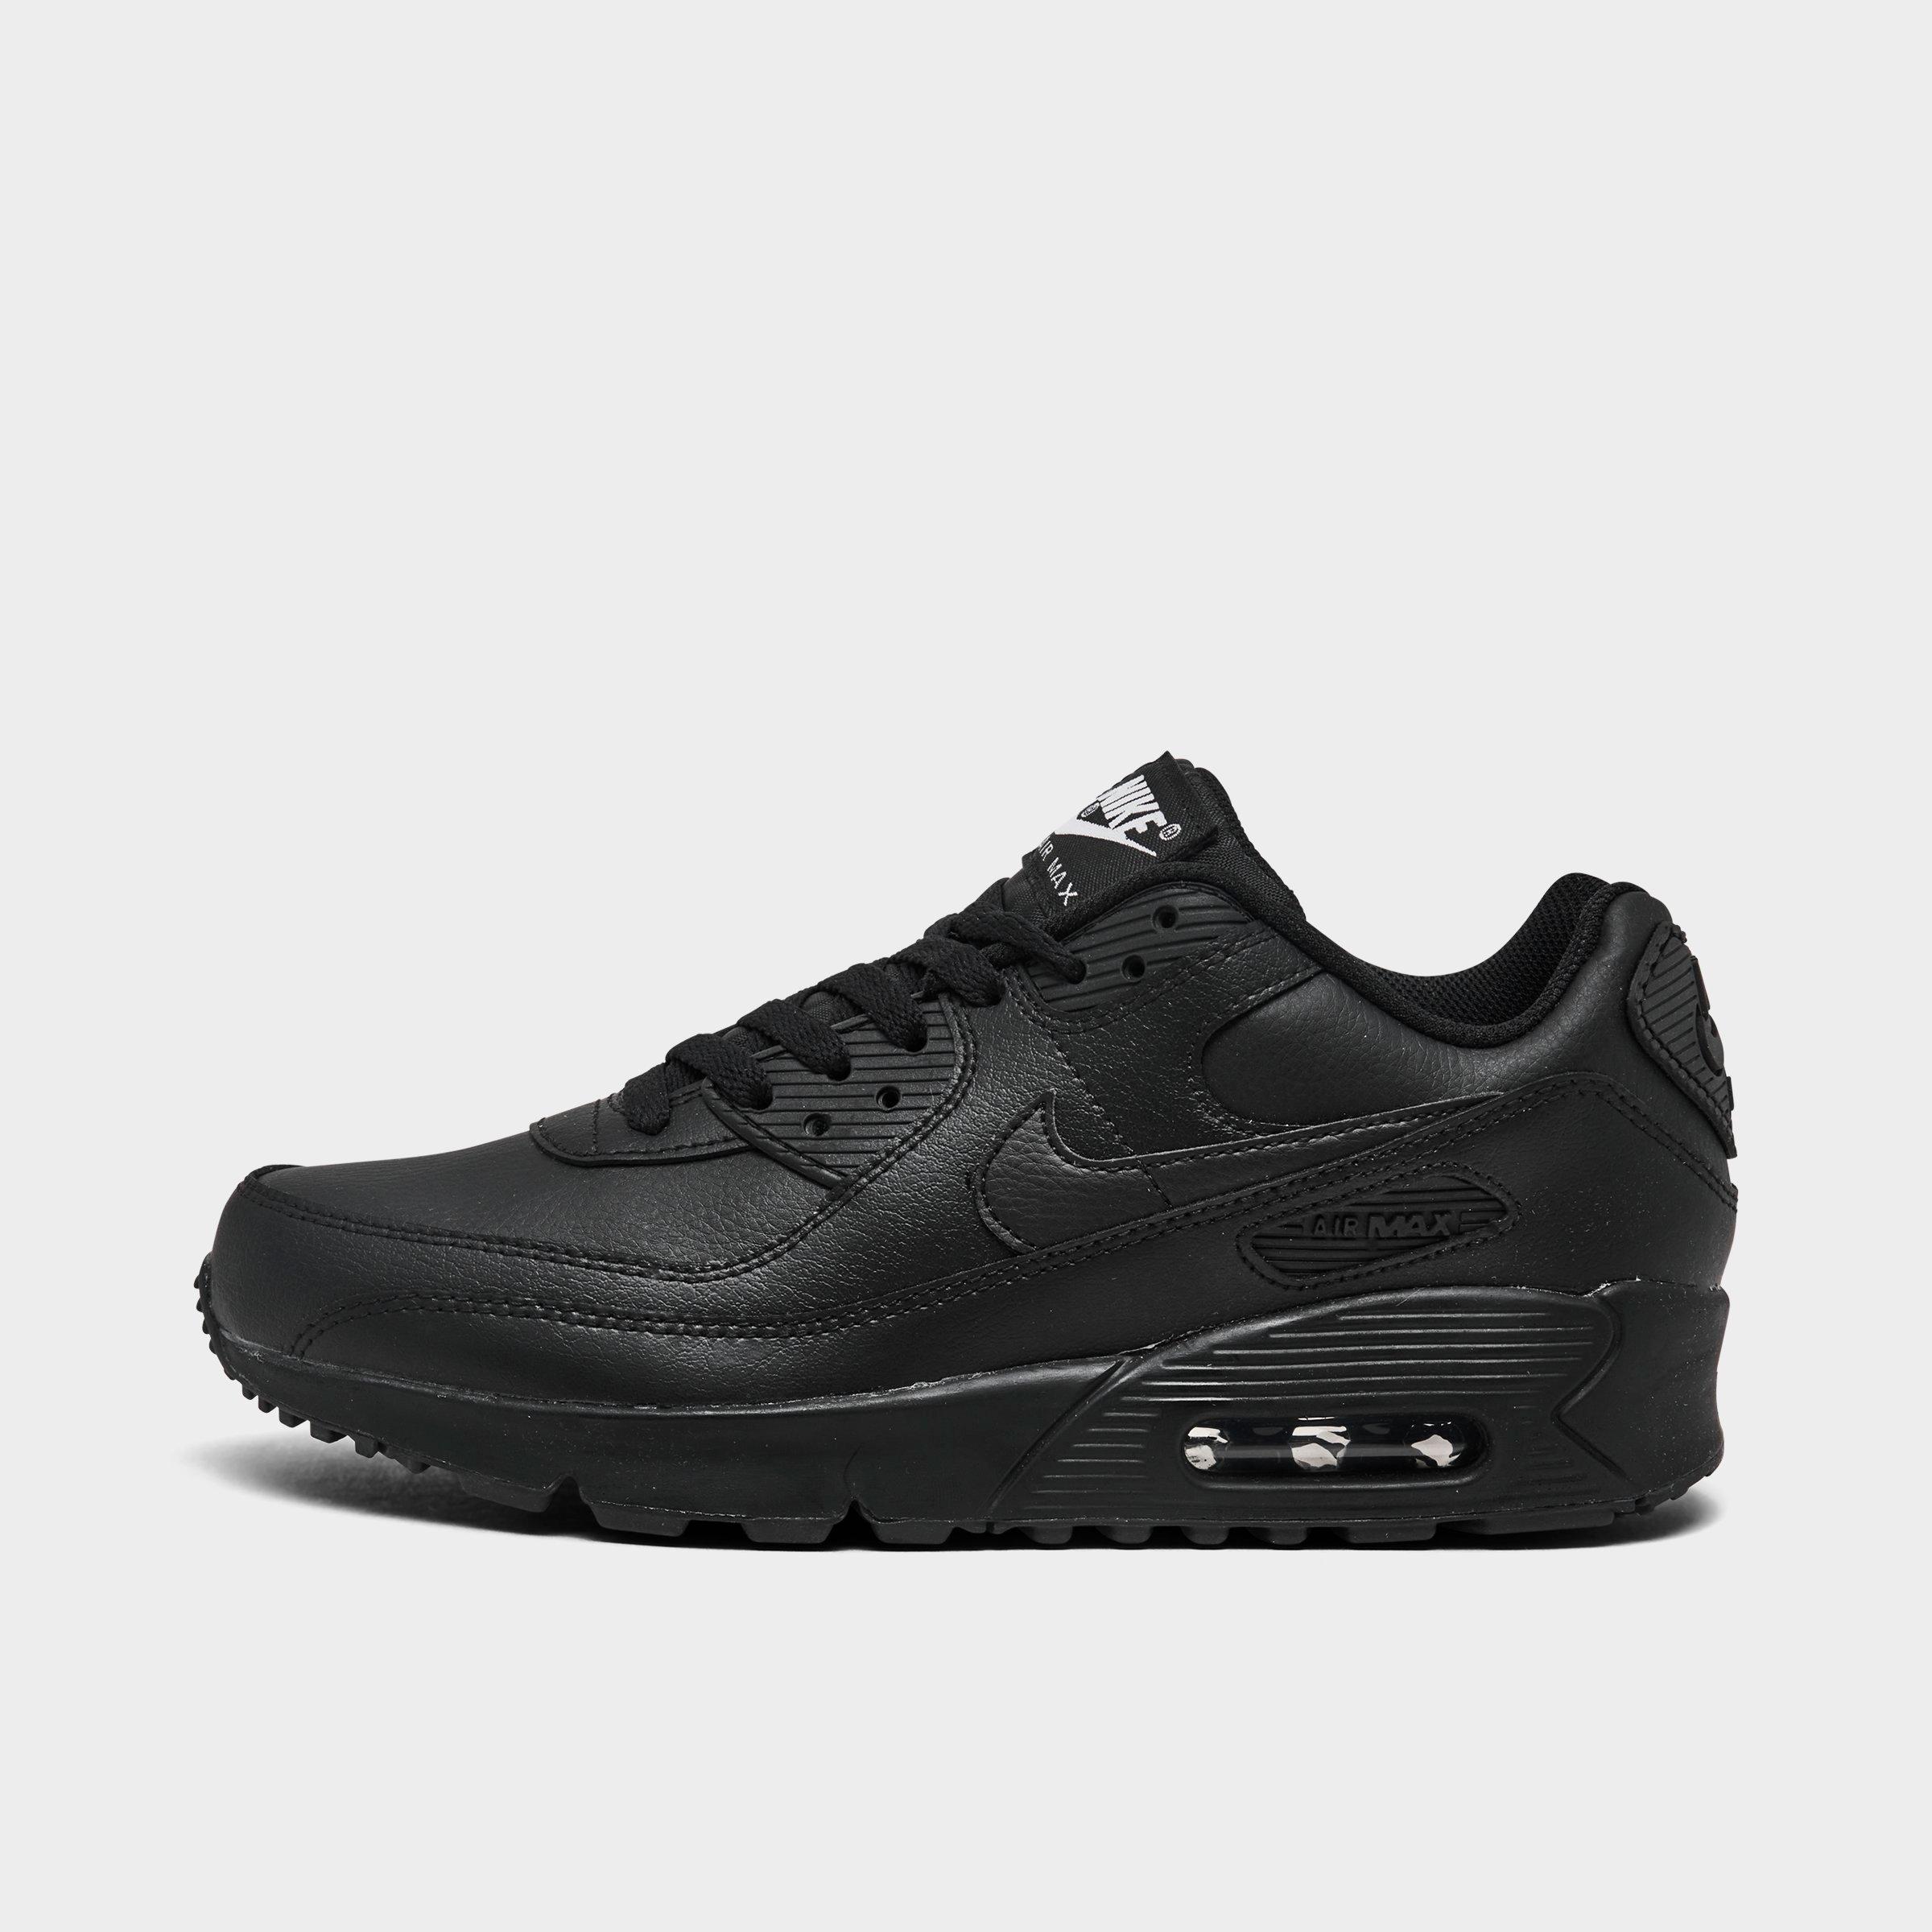 new air max for boys